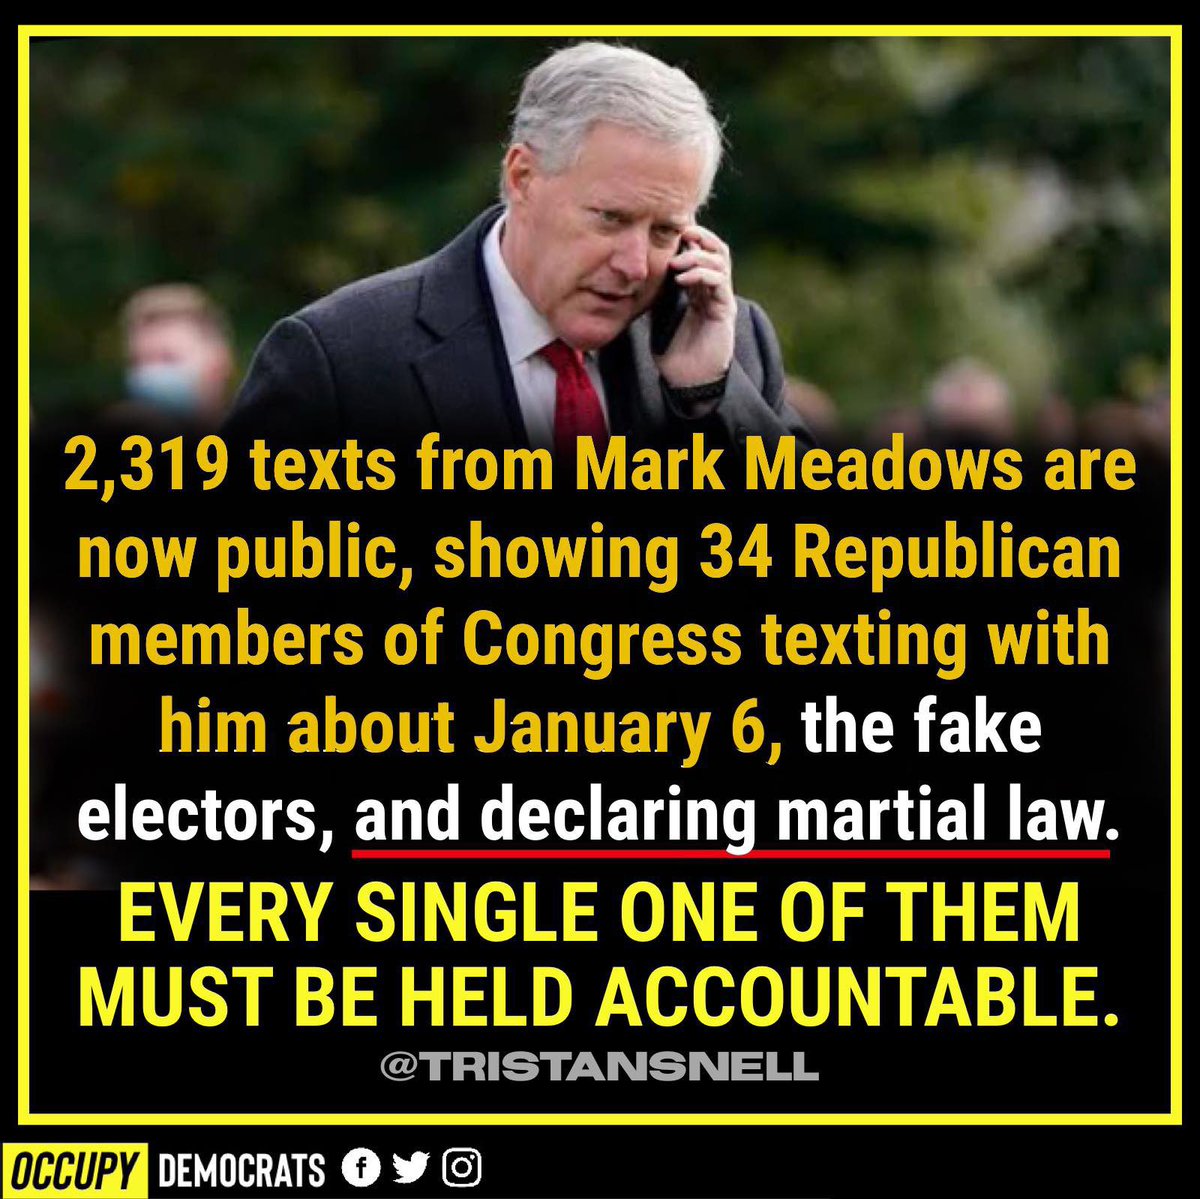 @JeffRoushPoetry Mark Meadows, professional victim with a backpack of “figurative knives”. He’s still playing that victim card but me thinks he’s played it for the last time. No sympathy for him. It should be jail for him.
Another #FridayLimericks home run Jeffrey!